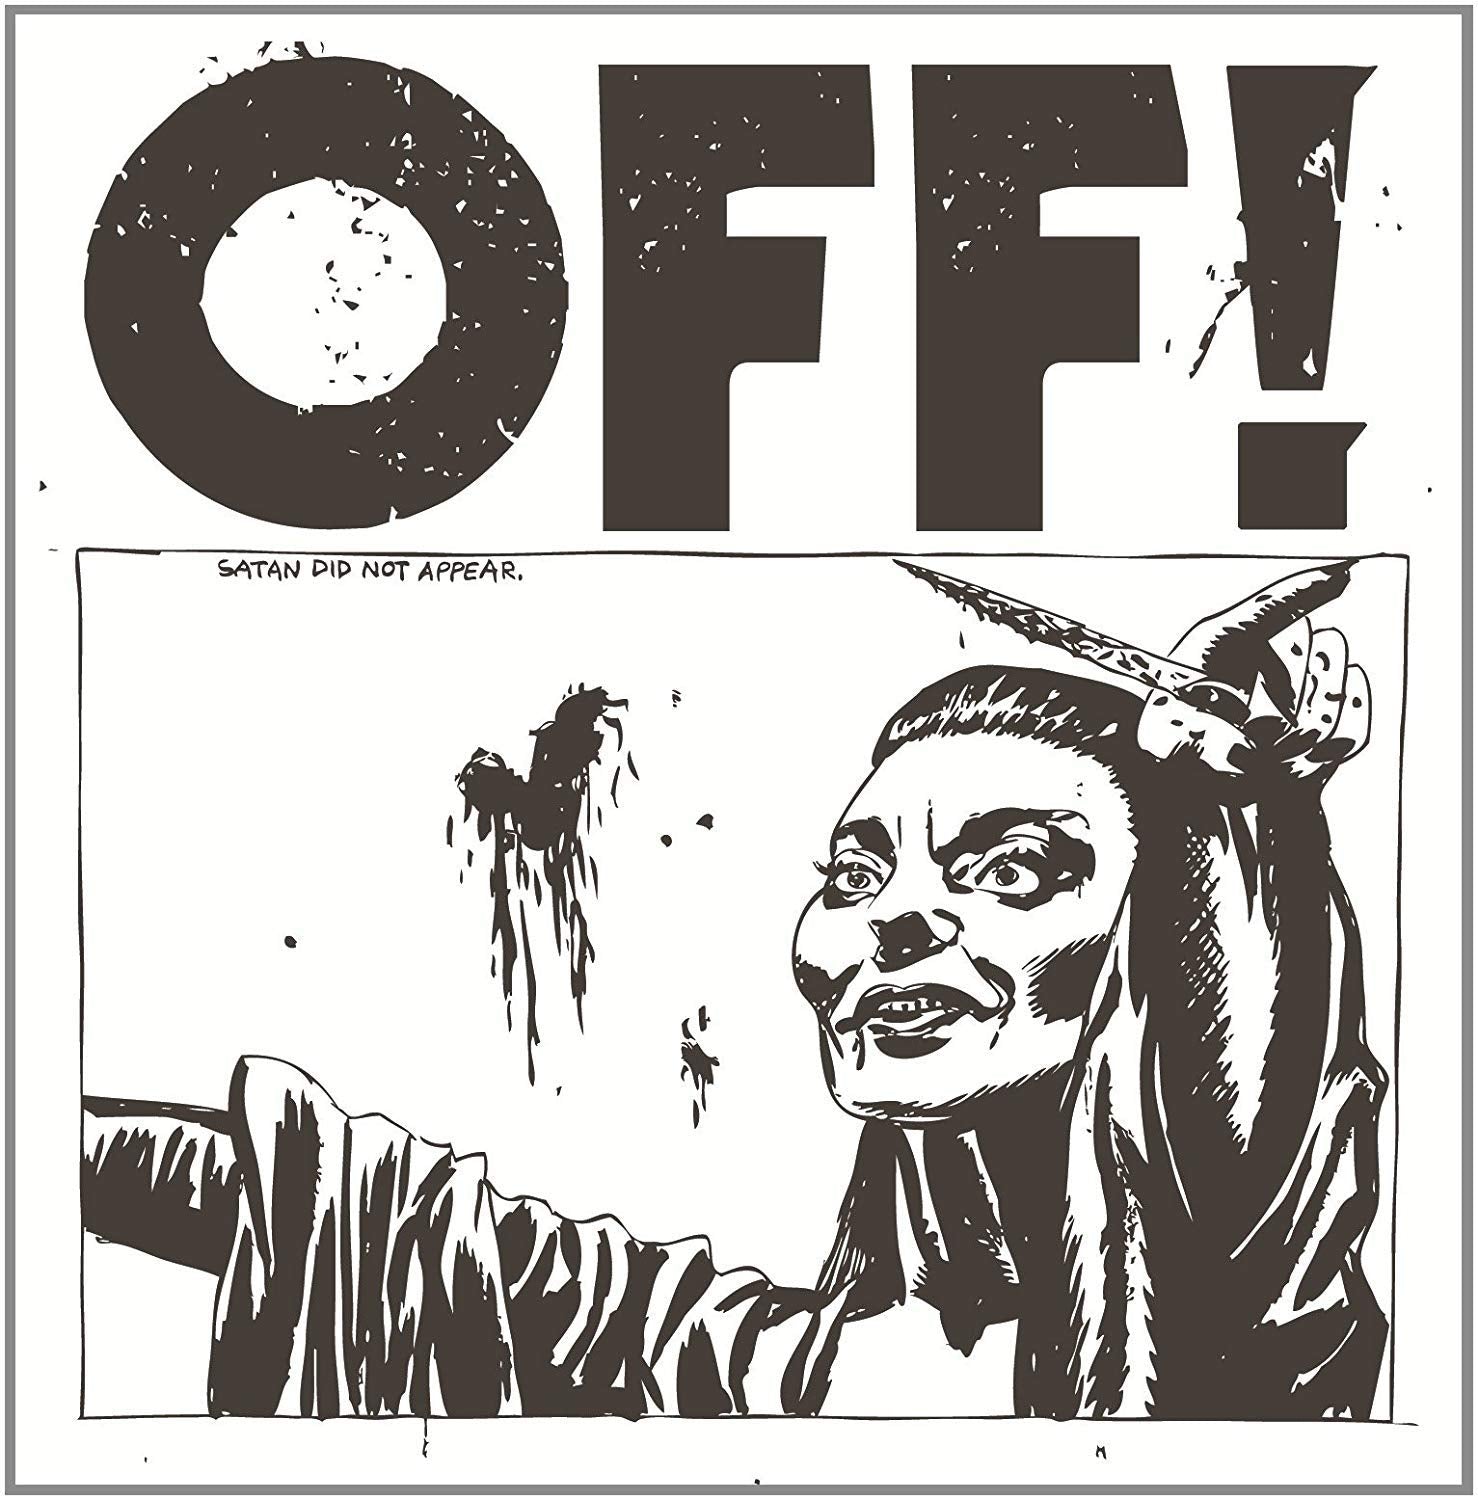 OFF! ‎– OFF!